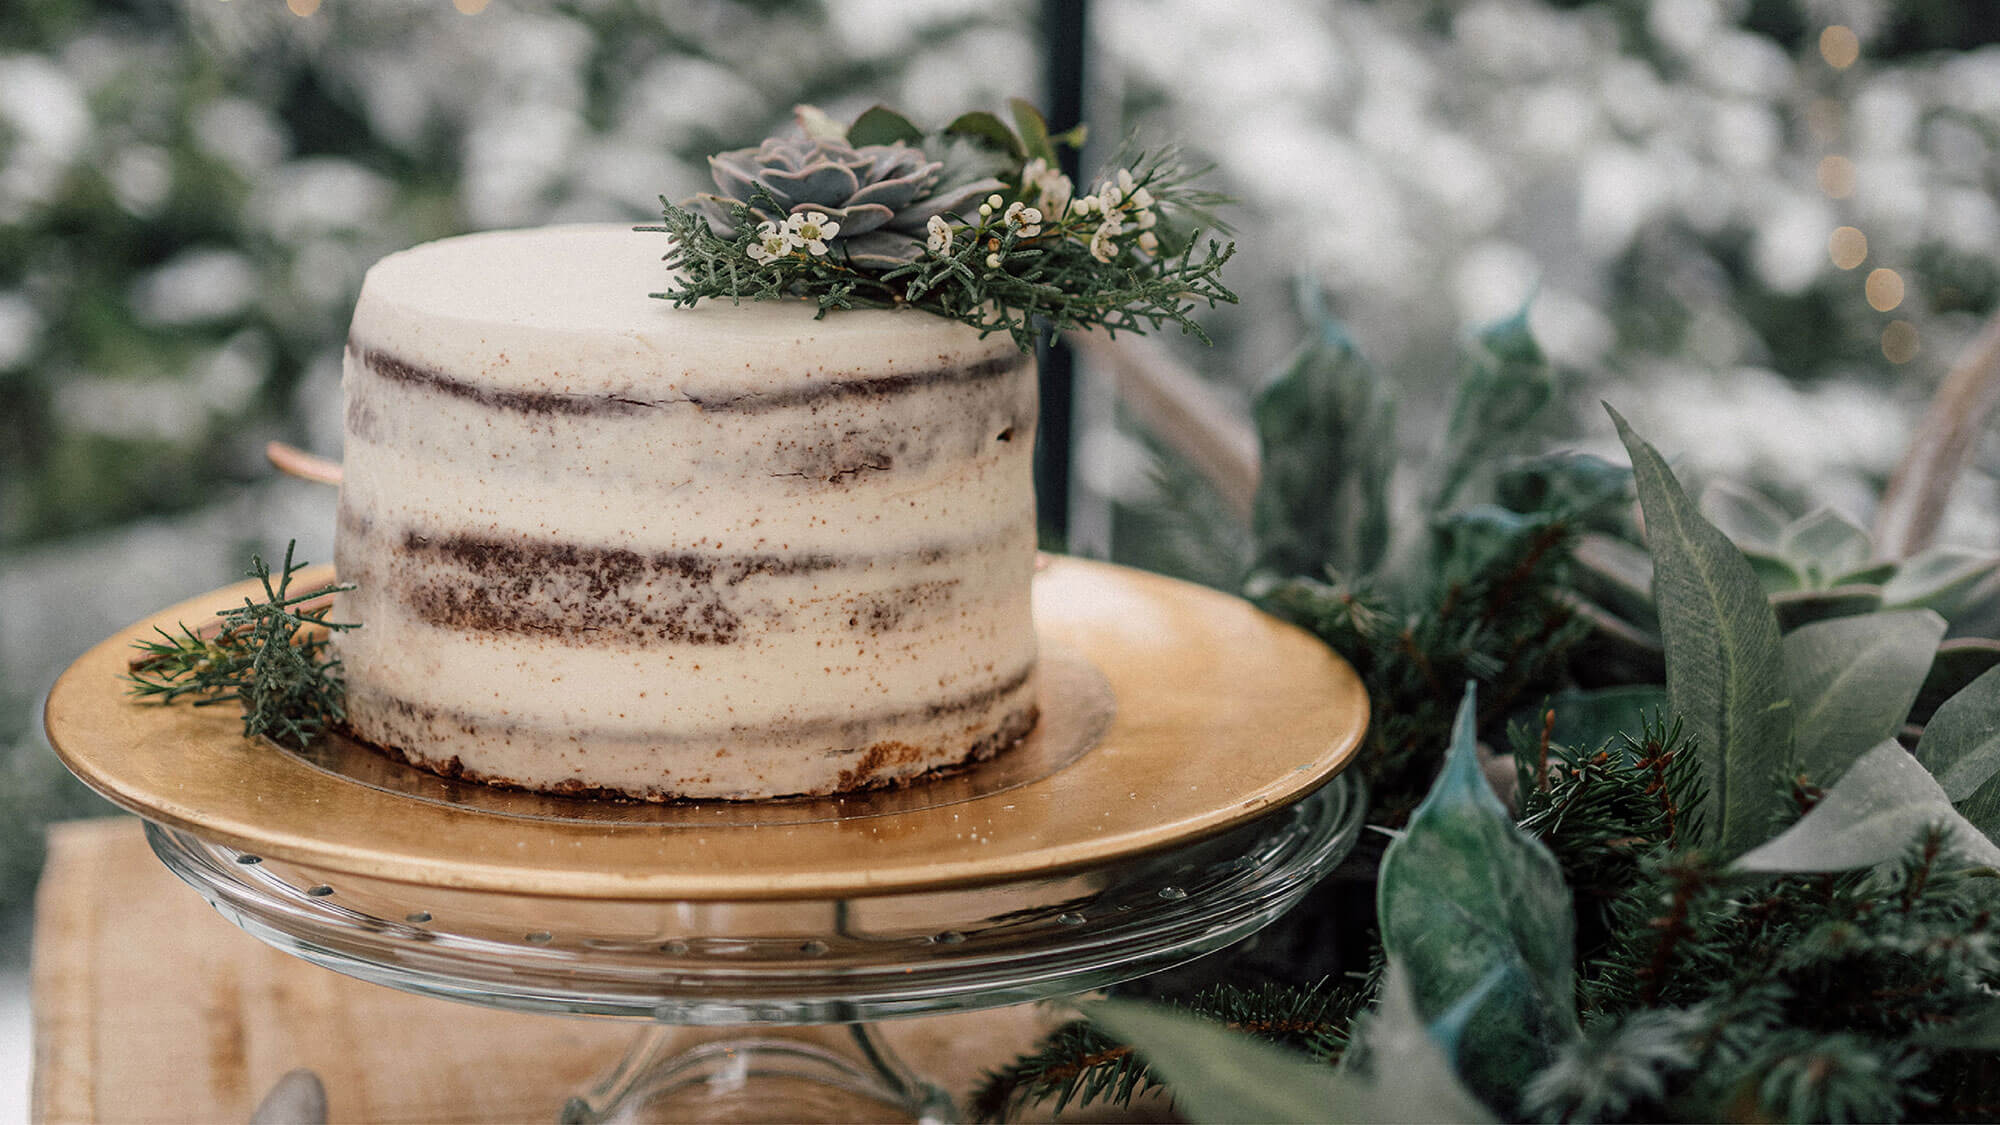 Naked cake with forest foliage